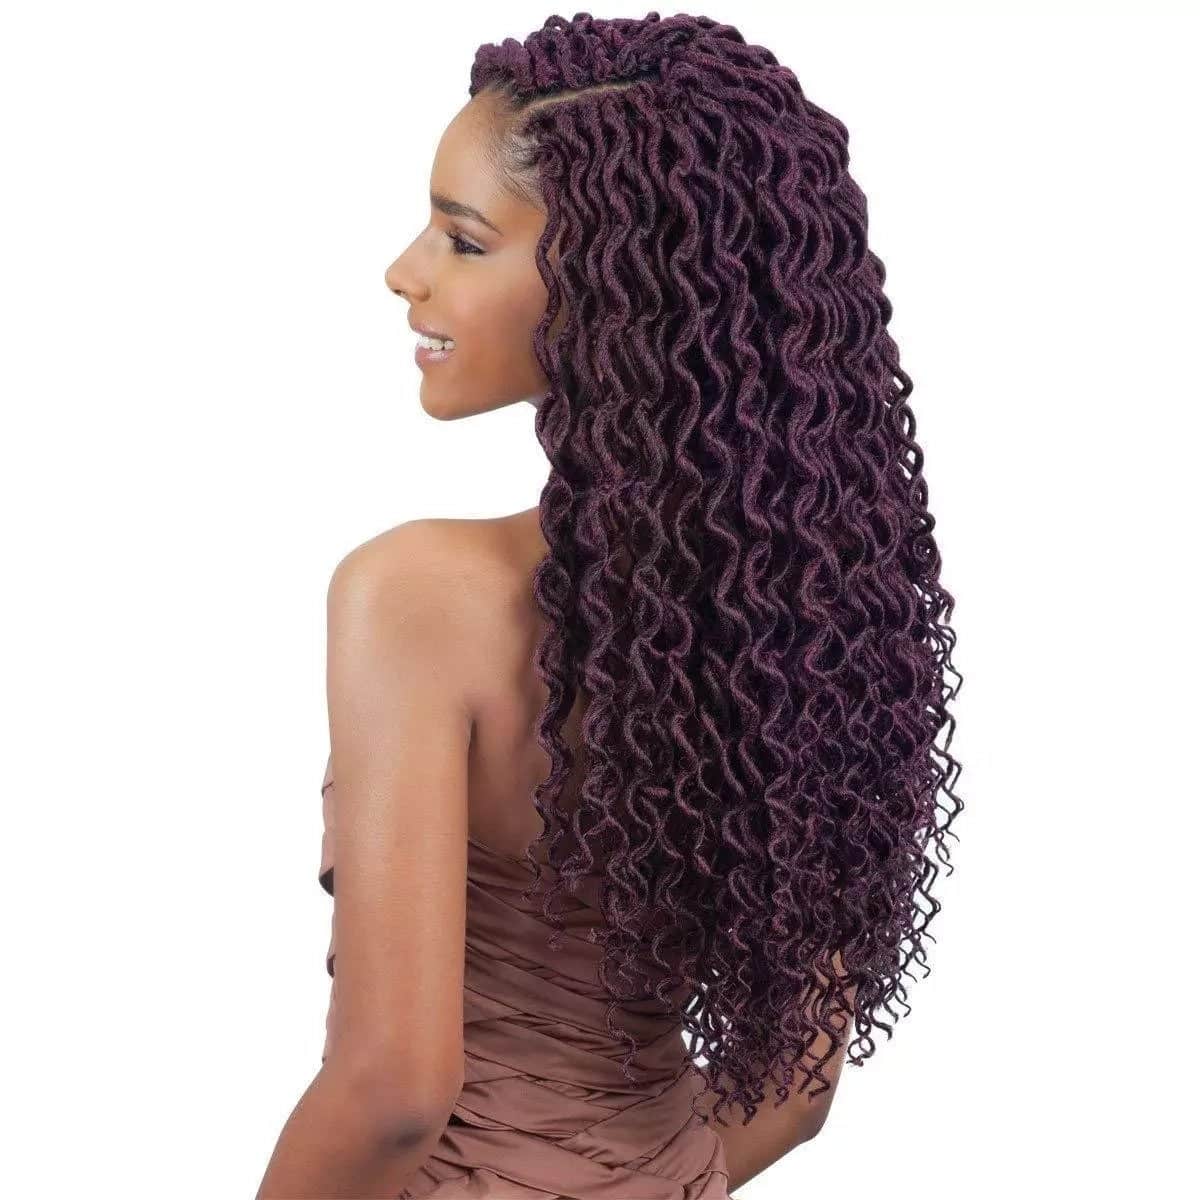 What Are Curly End Braids? | Find Top Braiders Near Me - FroHub